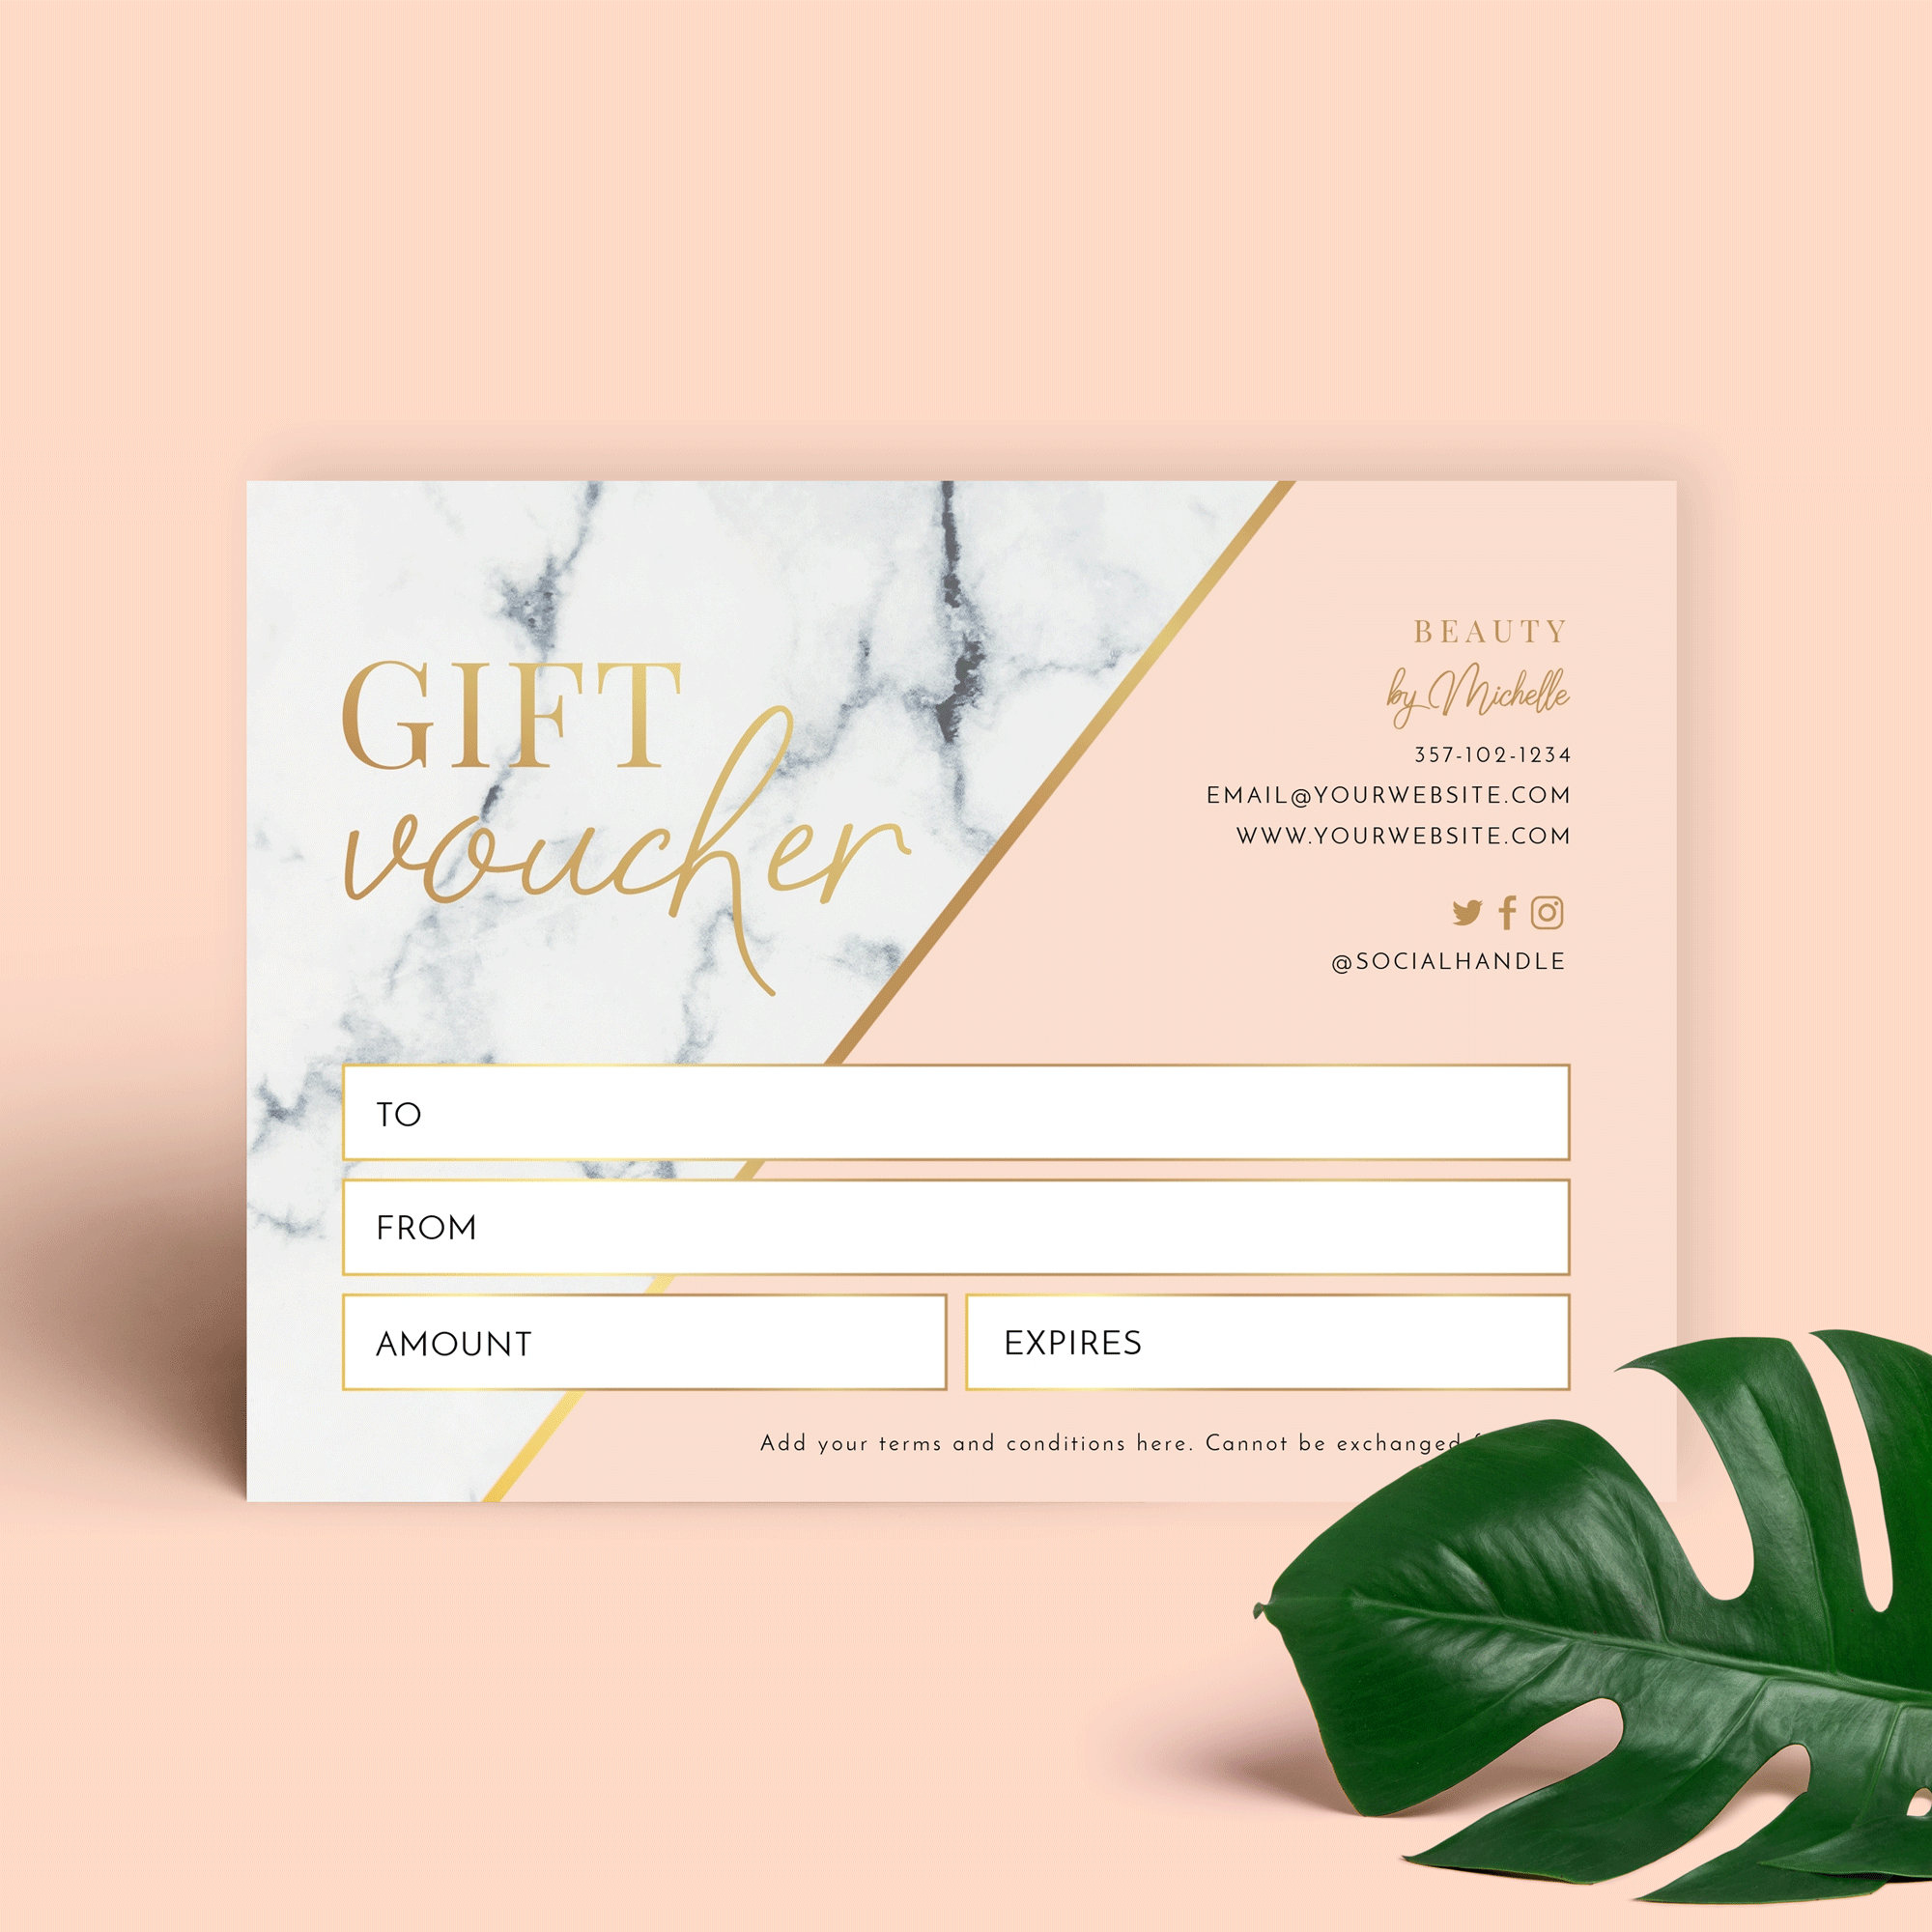 Salon Gift Certificate Template with regard to Free Salon Gift Certificate Template